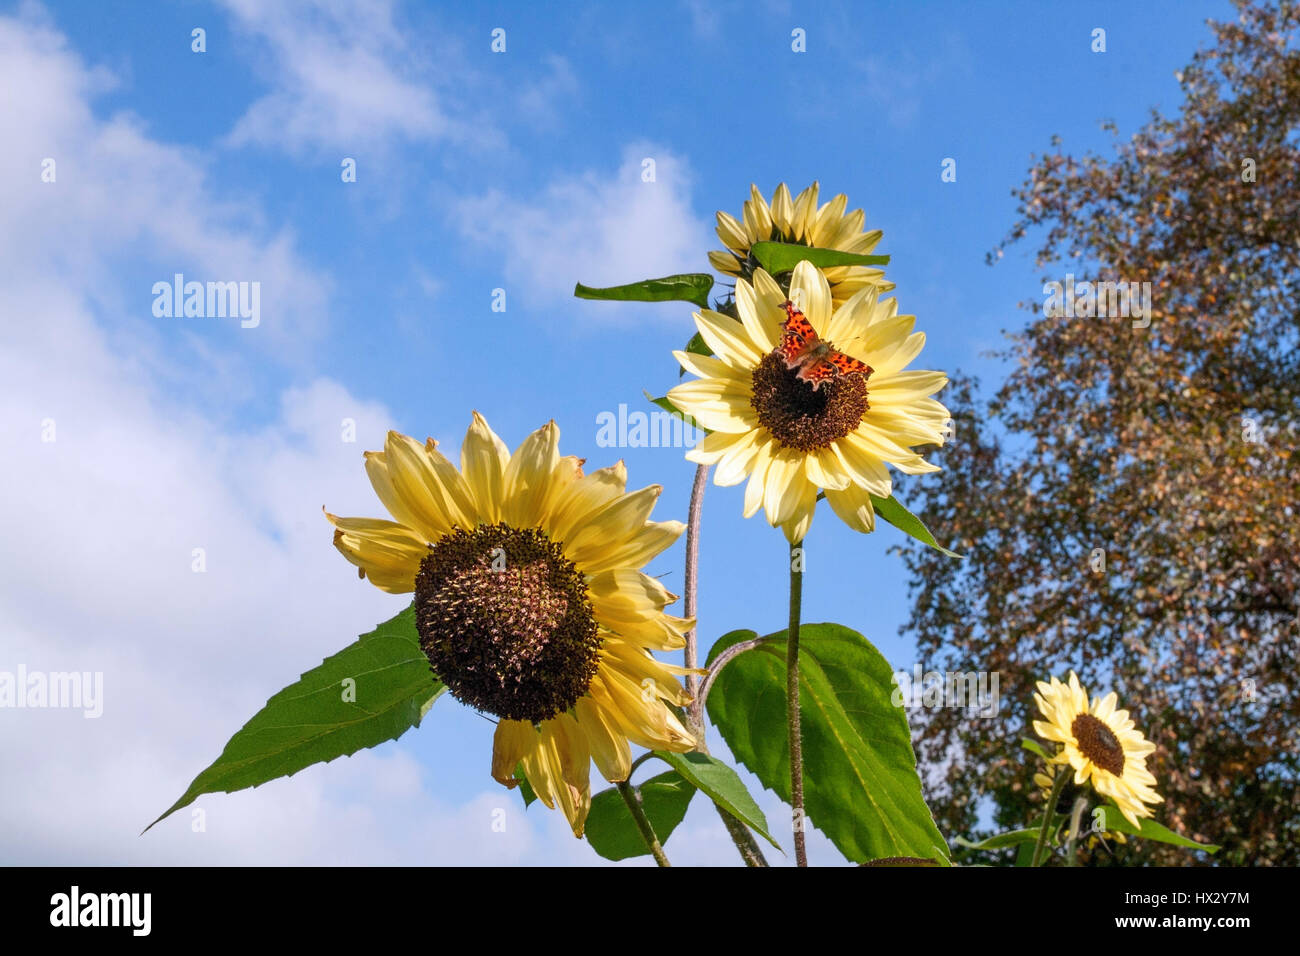 Sunflower with butterfly Stock Photo